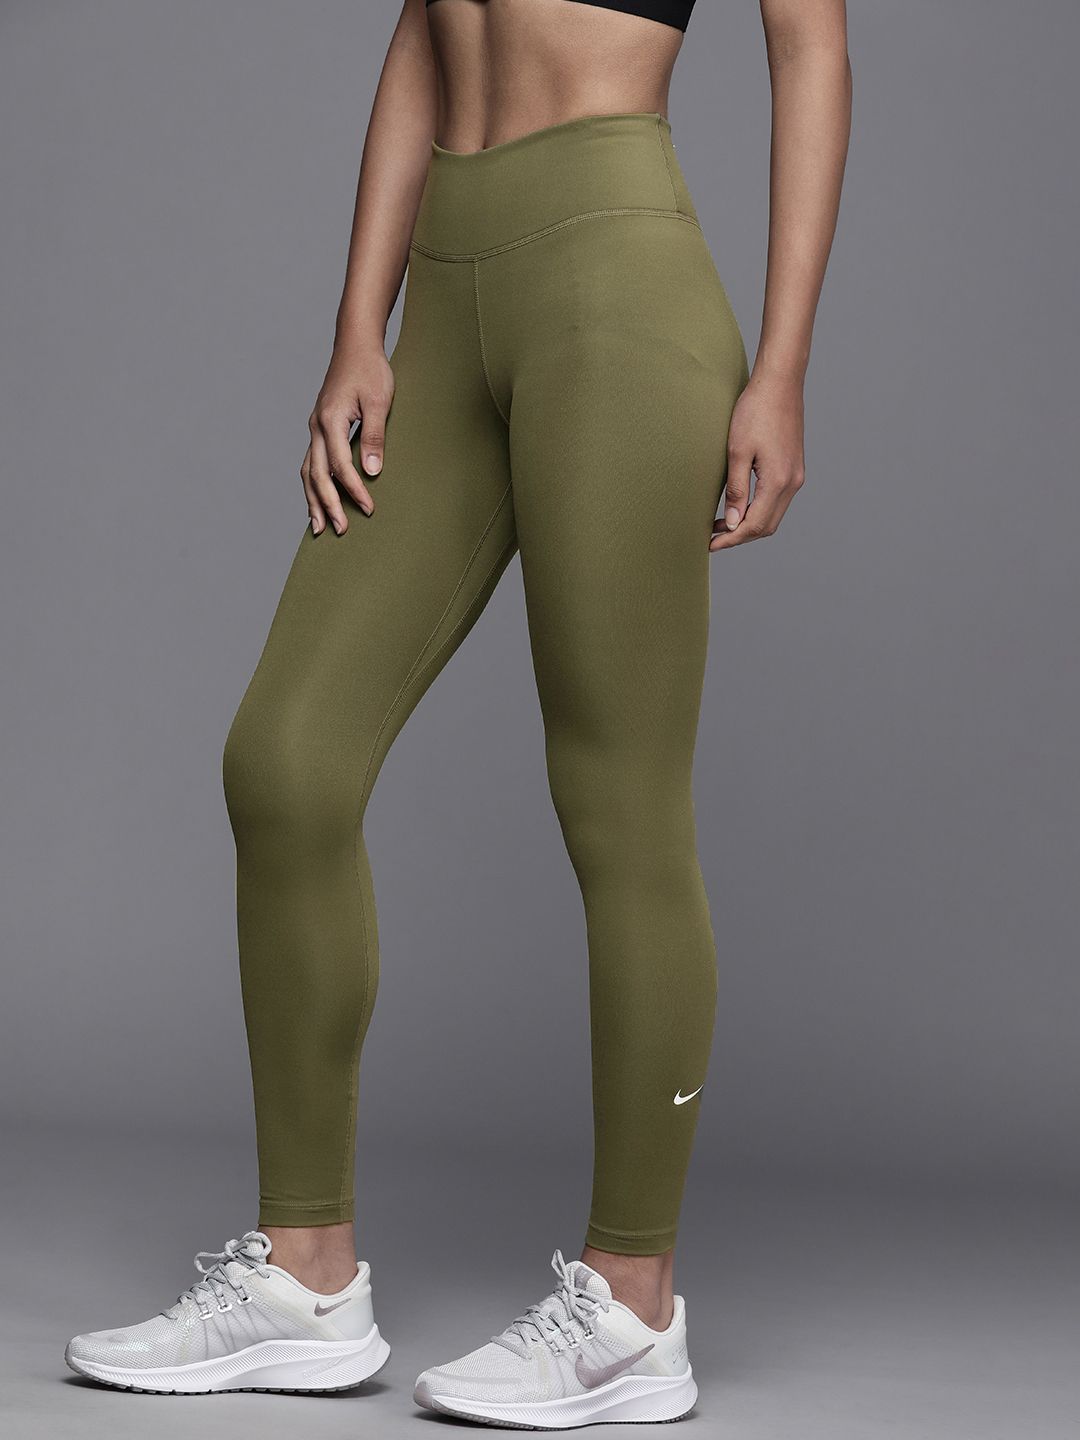 Nike Women Olive Green Dri-FIT Mid-Rise Tights Price in India